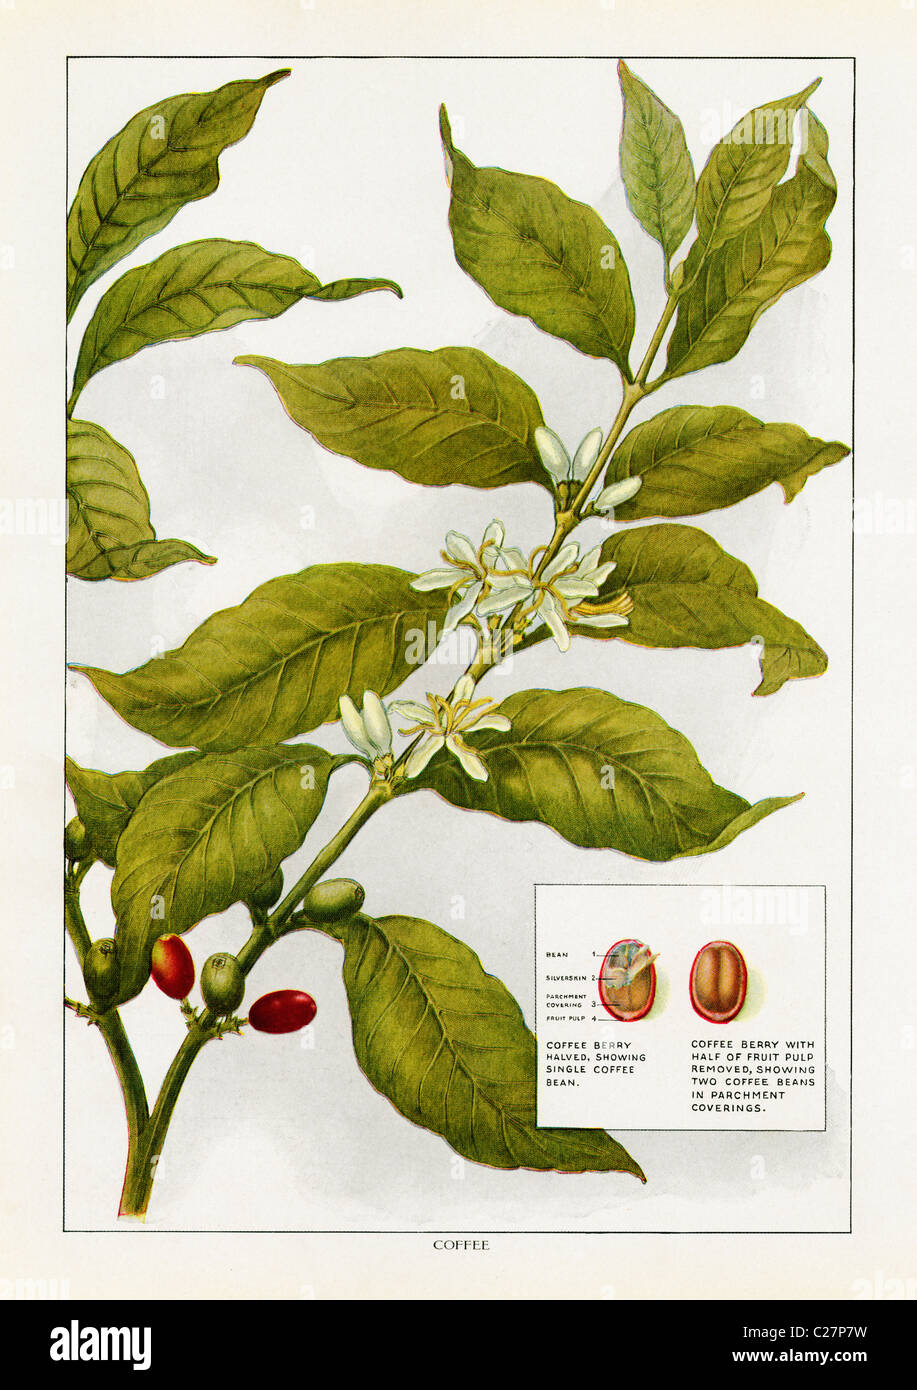 A vintage color illustration of berries from the Grocer’s Encyclopedia, c. 1911. Stock Photo